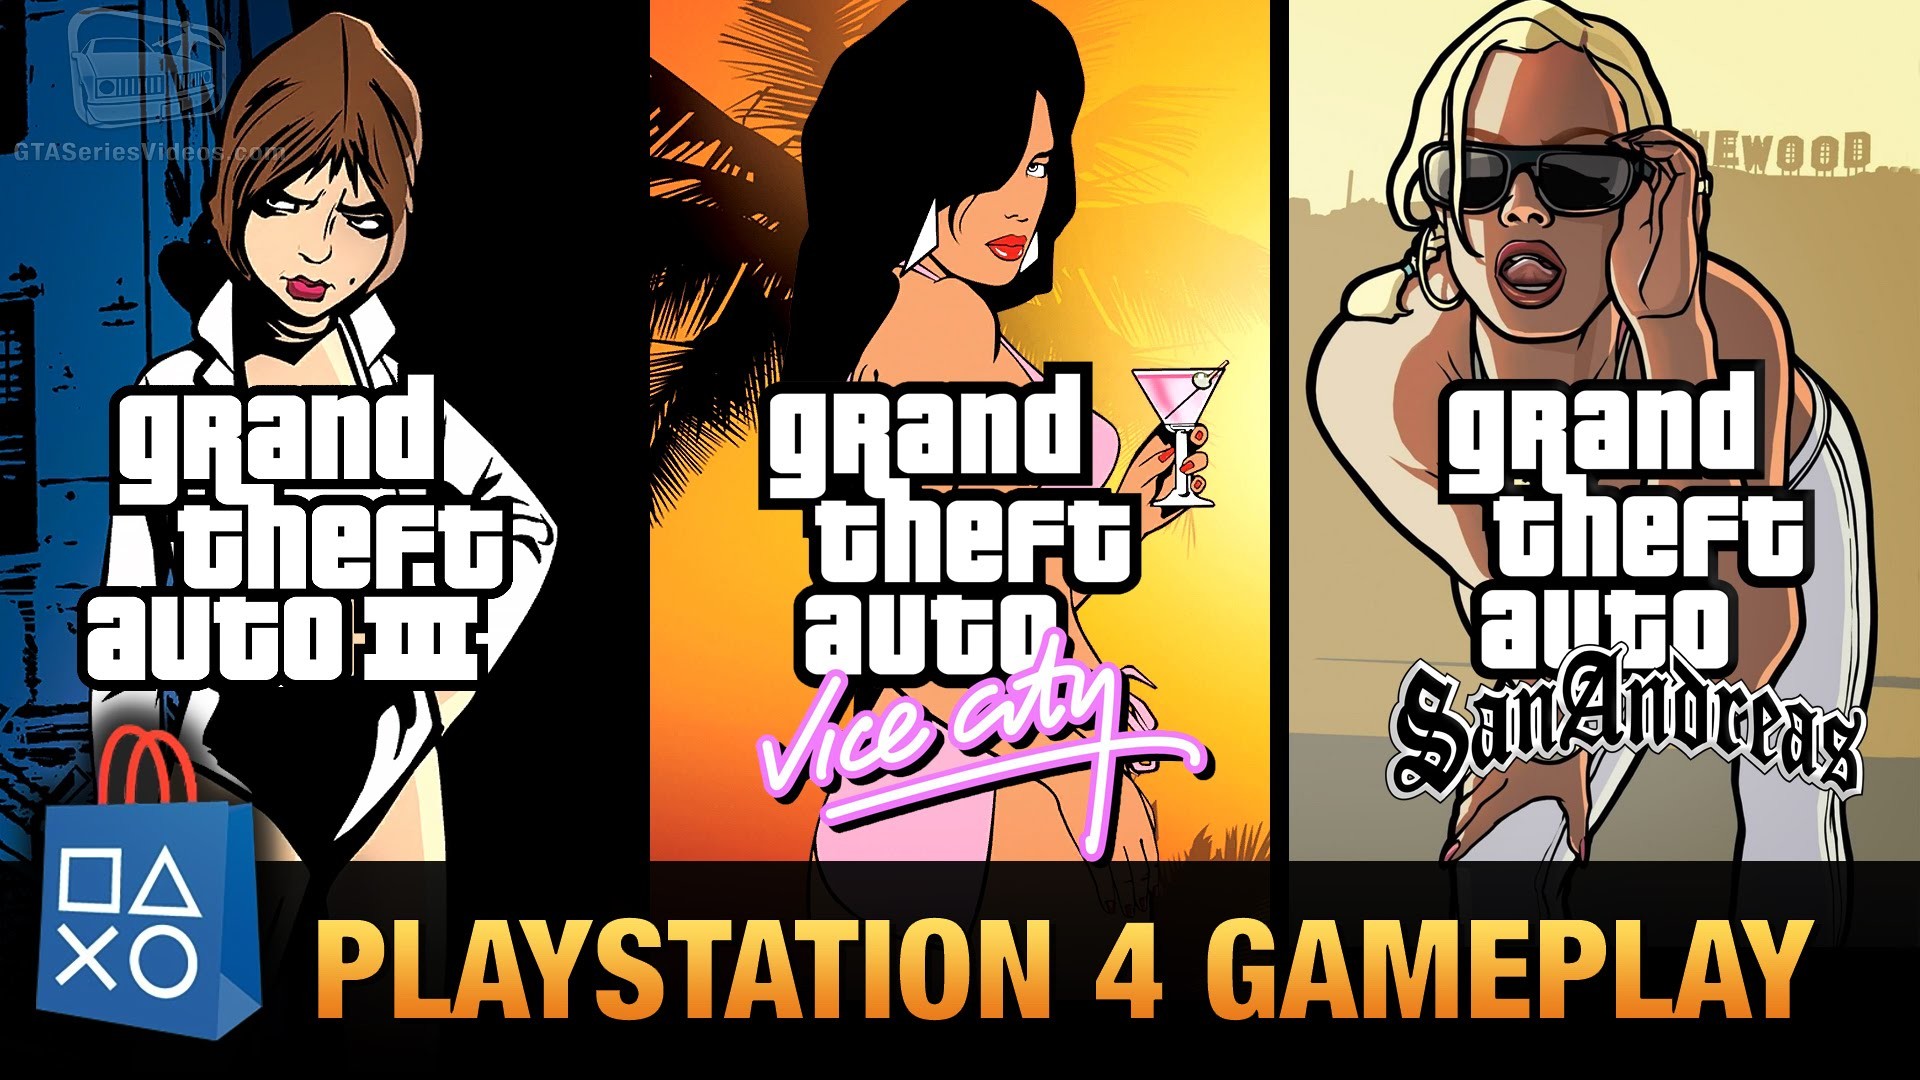 Gta3 Wallpaper Posted By Ethan Thompson